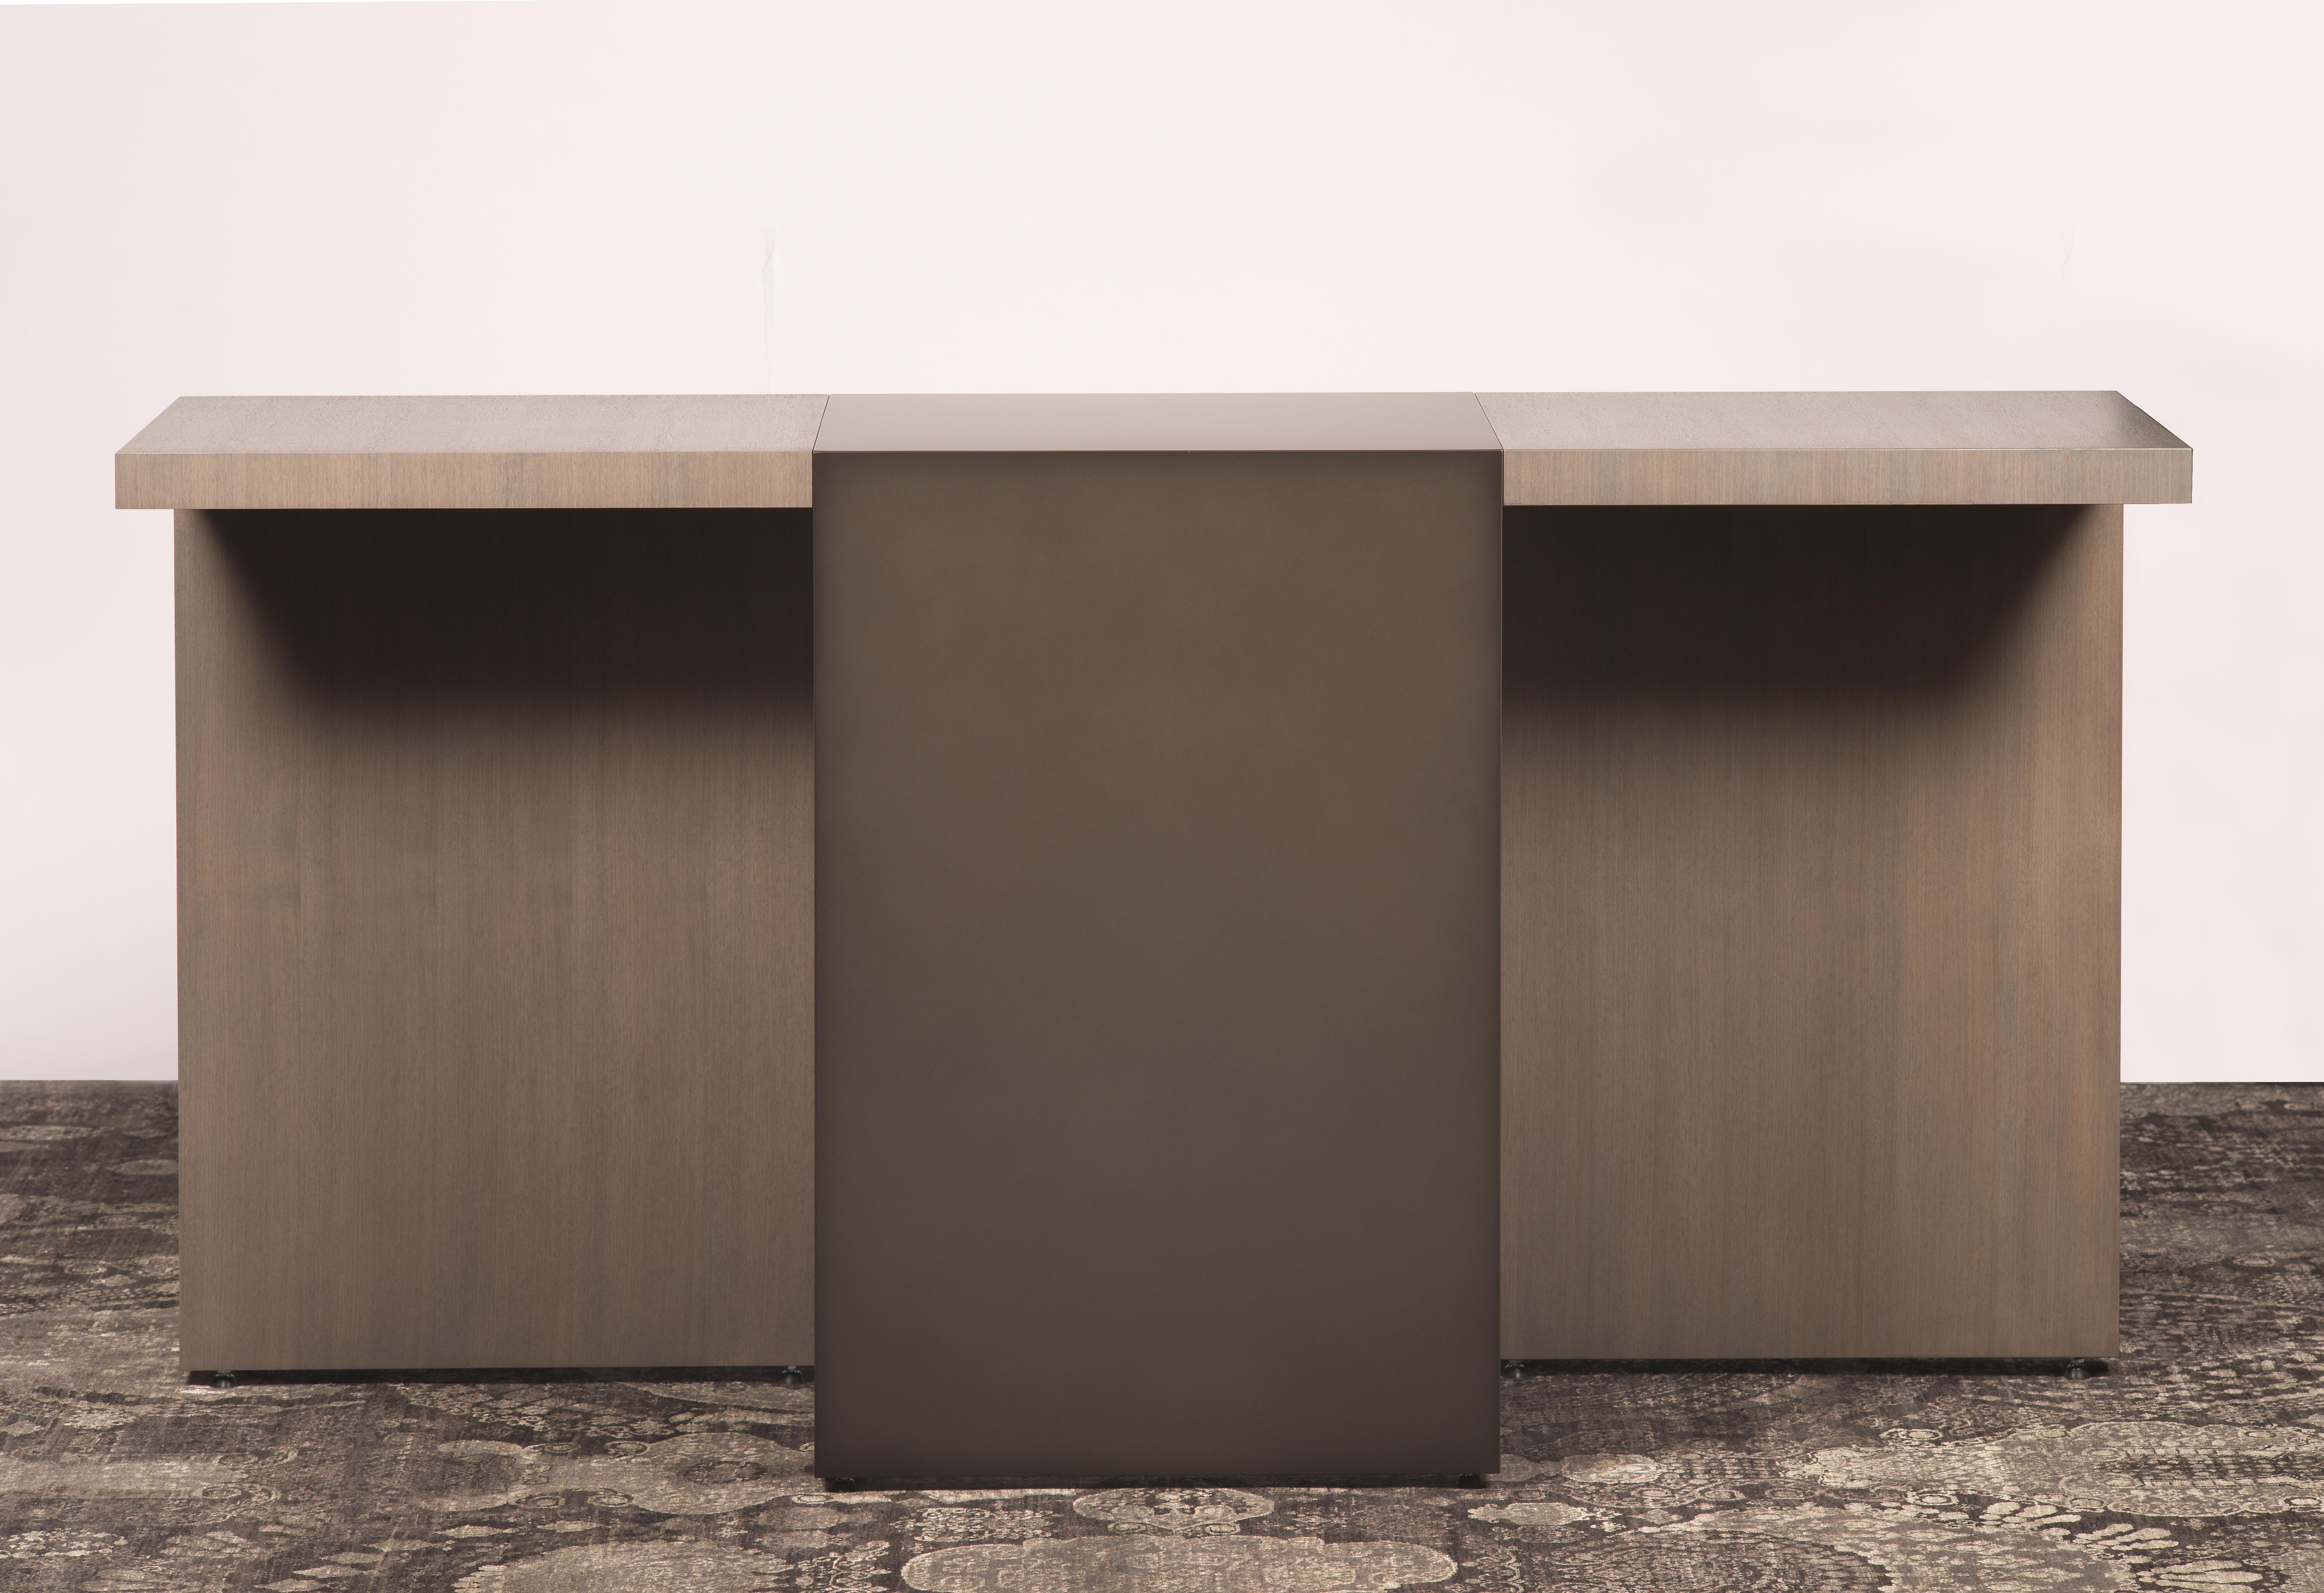 The LUMA design workshop flip console table is the result of thoughtful design and expert craftsmanship. Two-stone oak ends offset a charcoal powder coated steel center.

Like all LUMA furniture, this piece is made to order, and can be crafted to